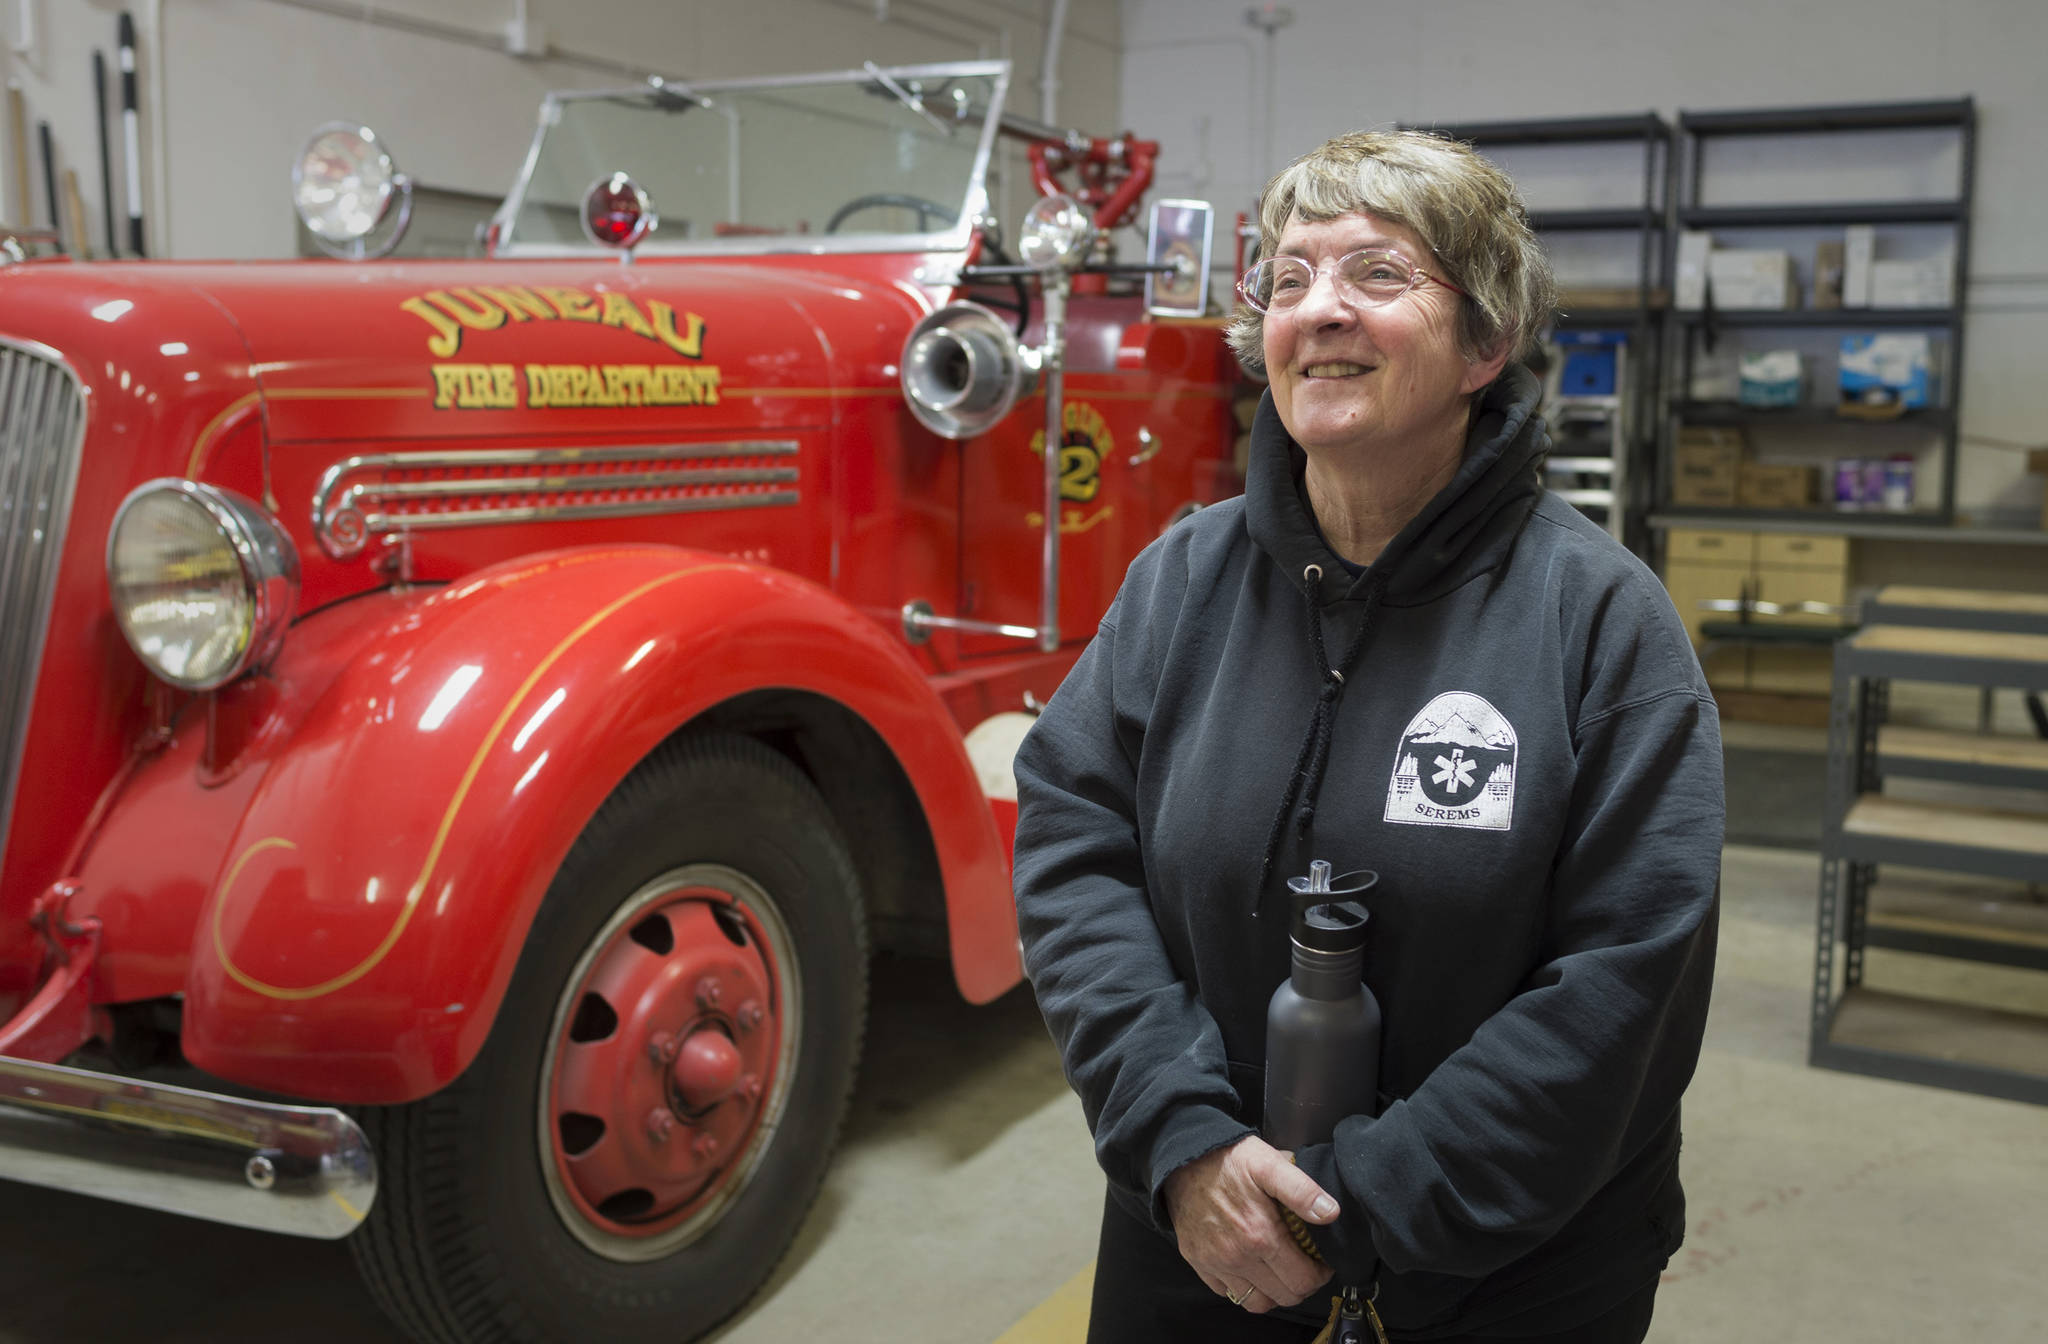 Kathy Miller talks on March 7 about her 10 years as a volunteer firefighter/EMT for Capital City Fire/Rescue at the Lynn Canal Fire Station after a career as a nurse. (Michael Penn | Juneau Empire)